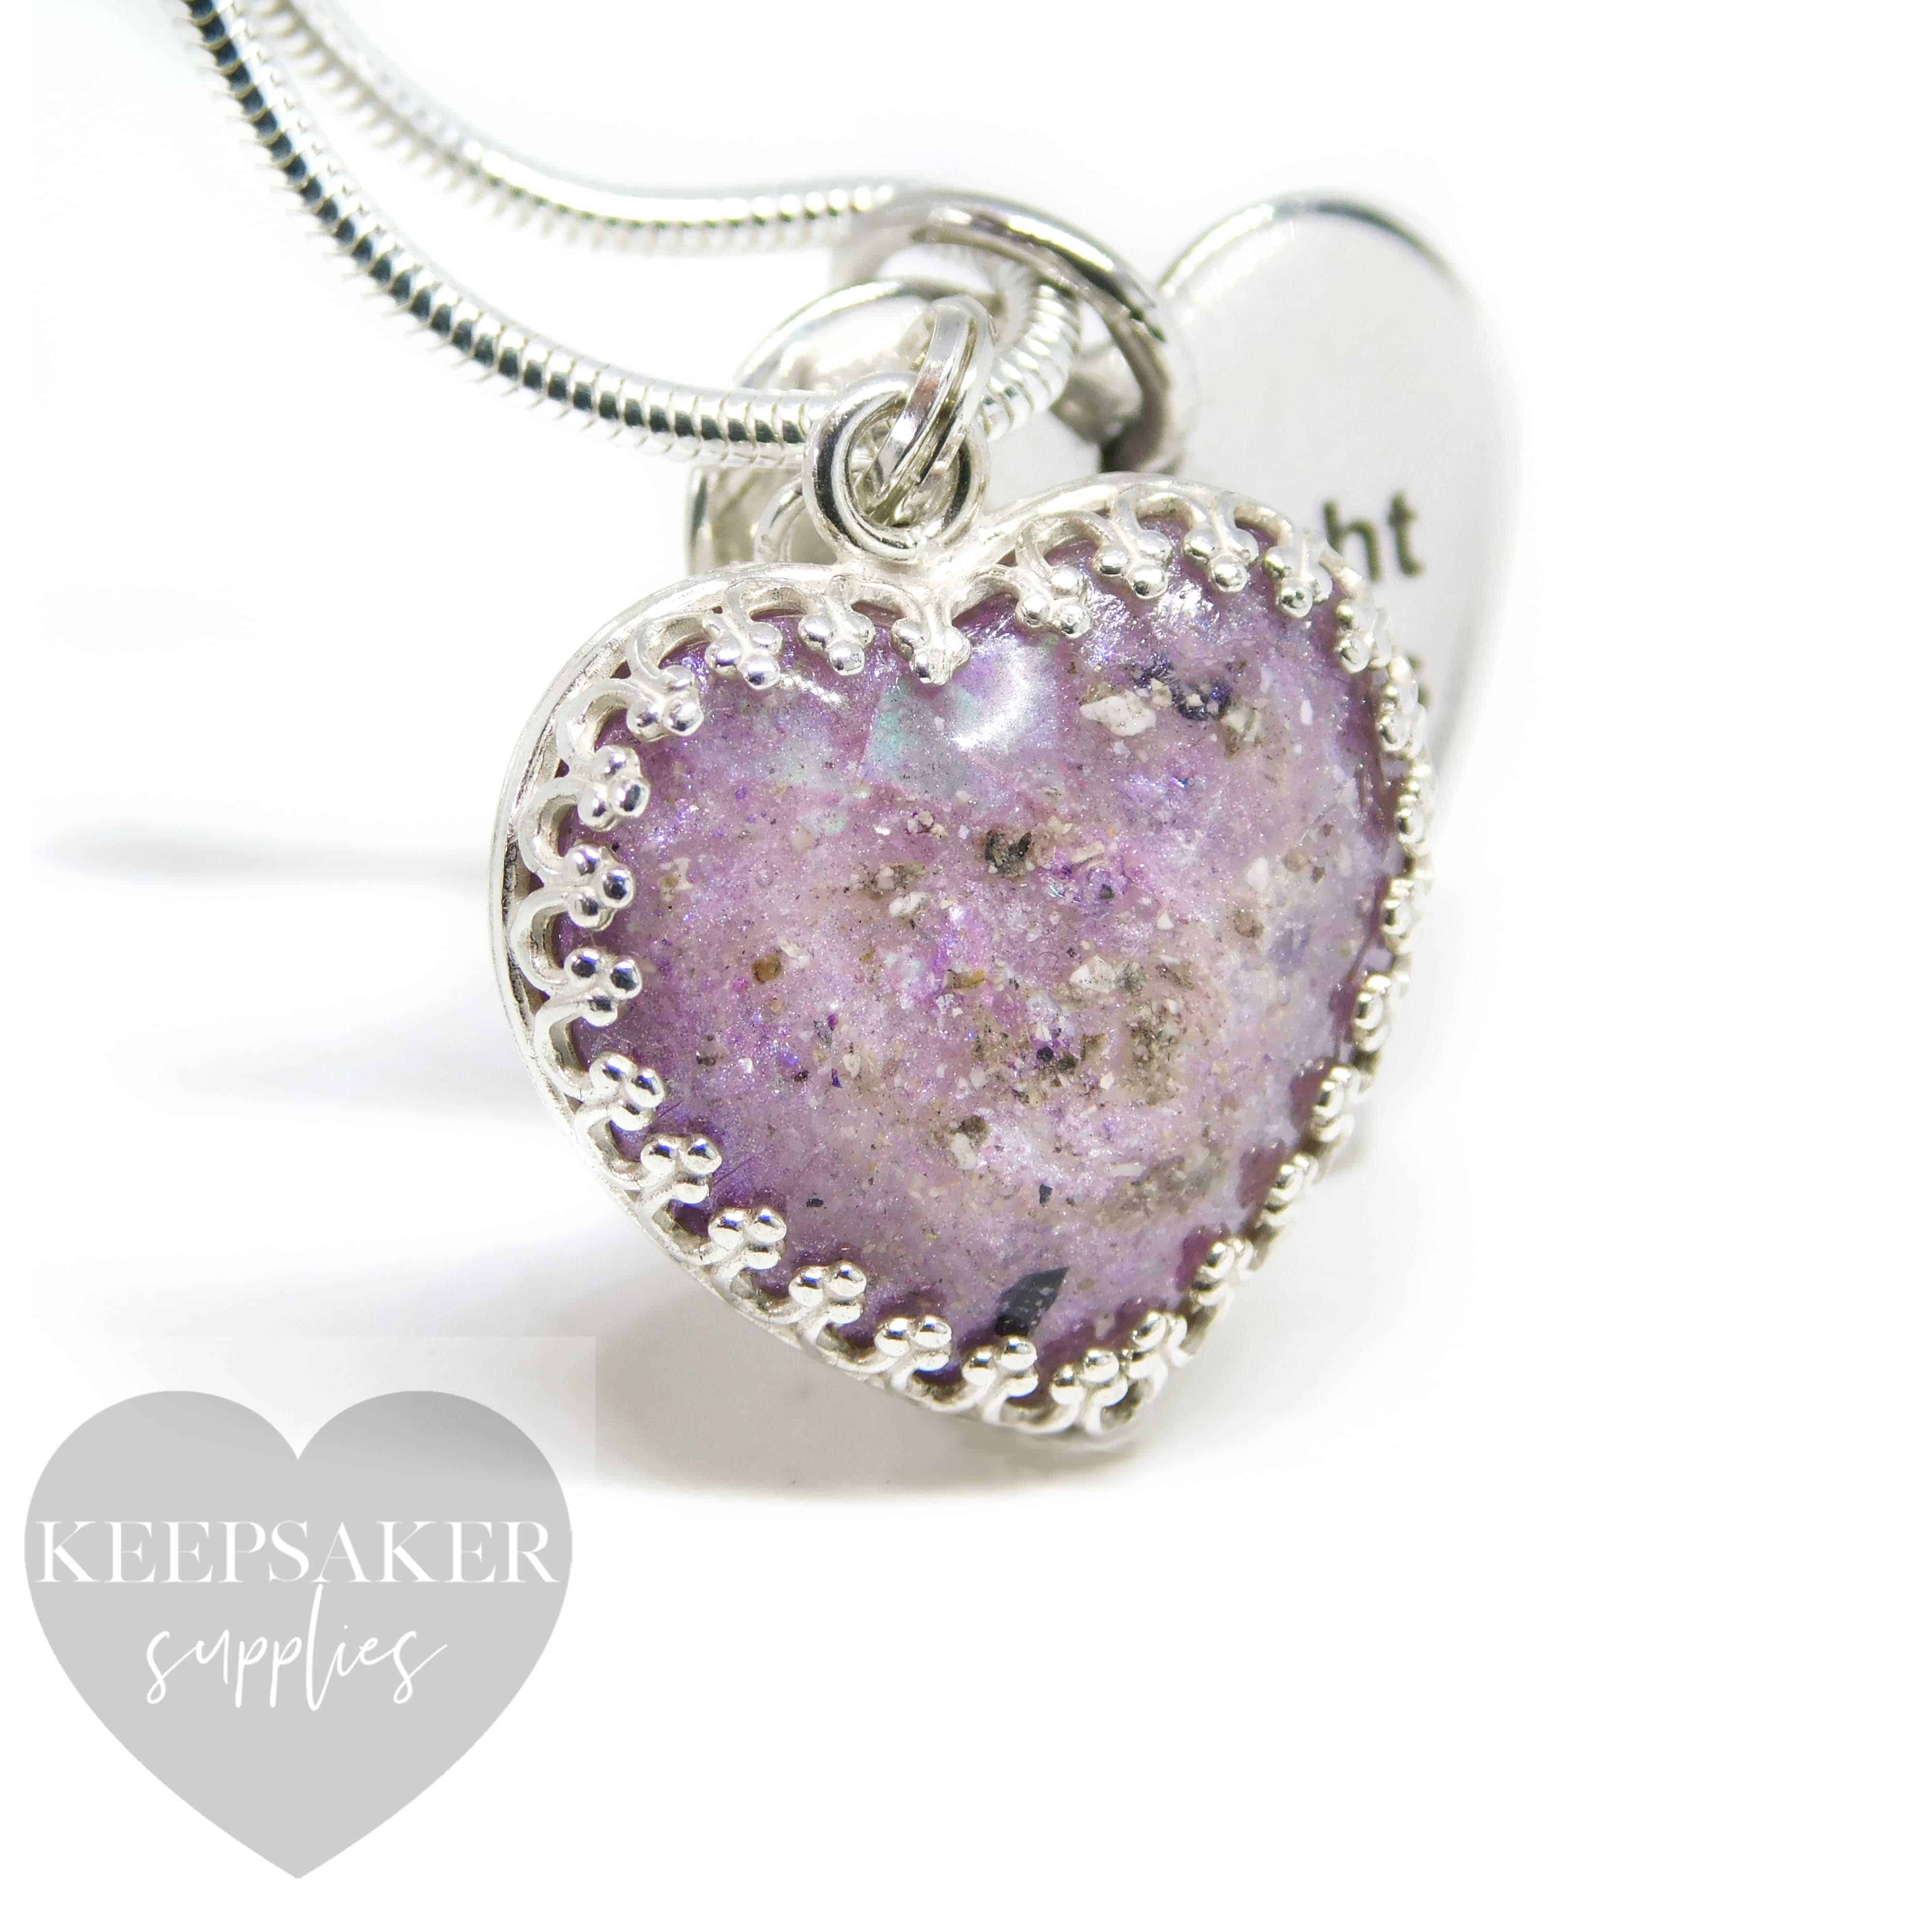 cremation ash heart with orchid purple sparkle mix and October birthstone opal, shown with a medium snake chain upgrade and large engraved heart